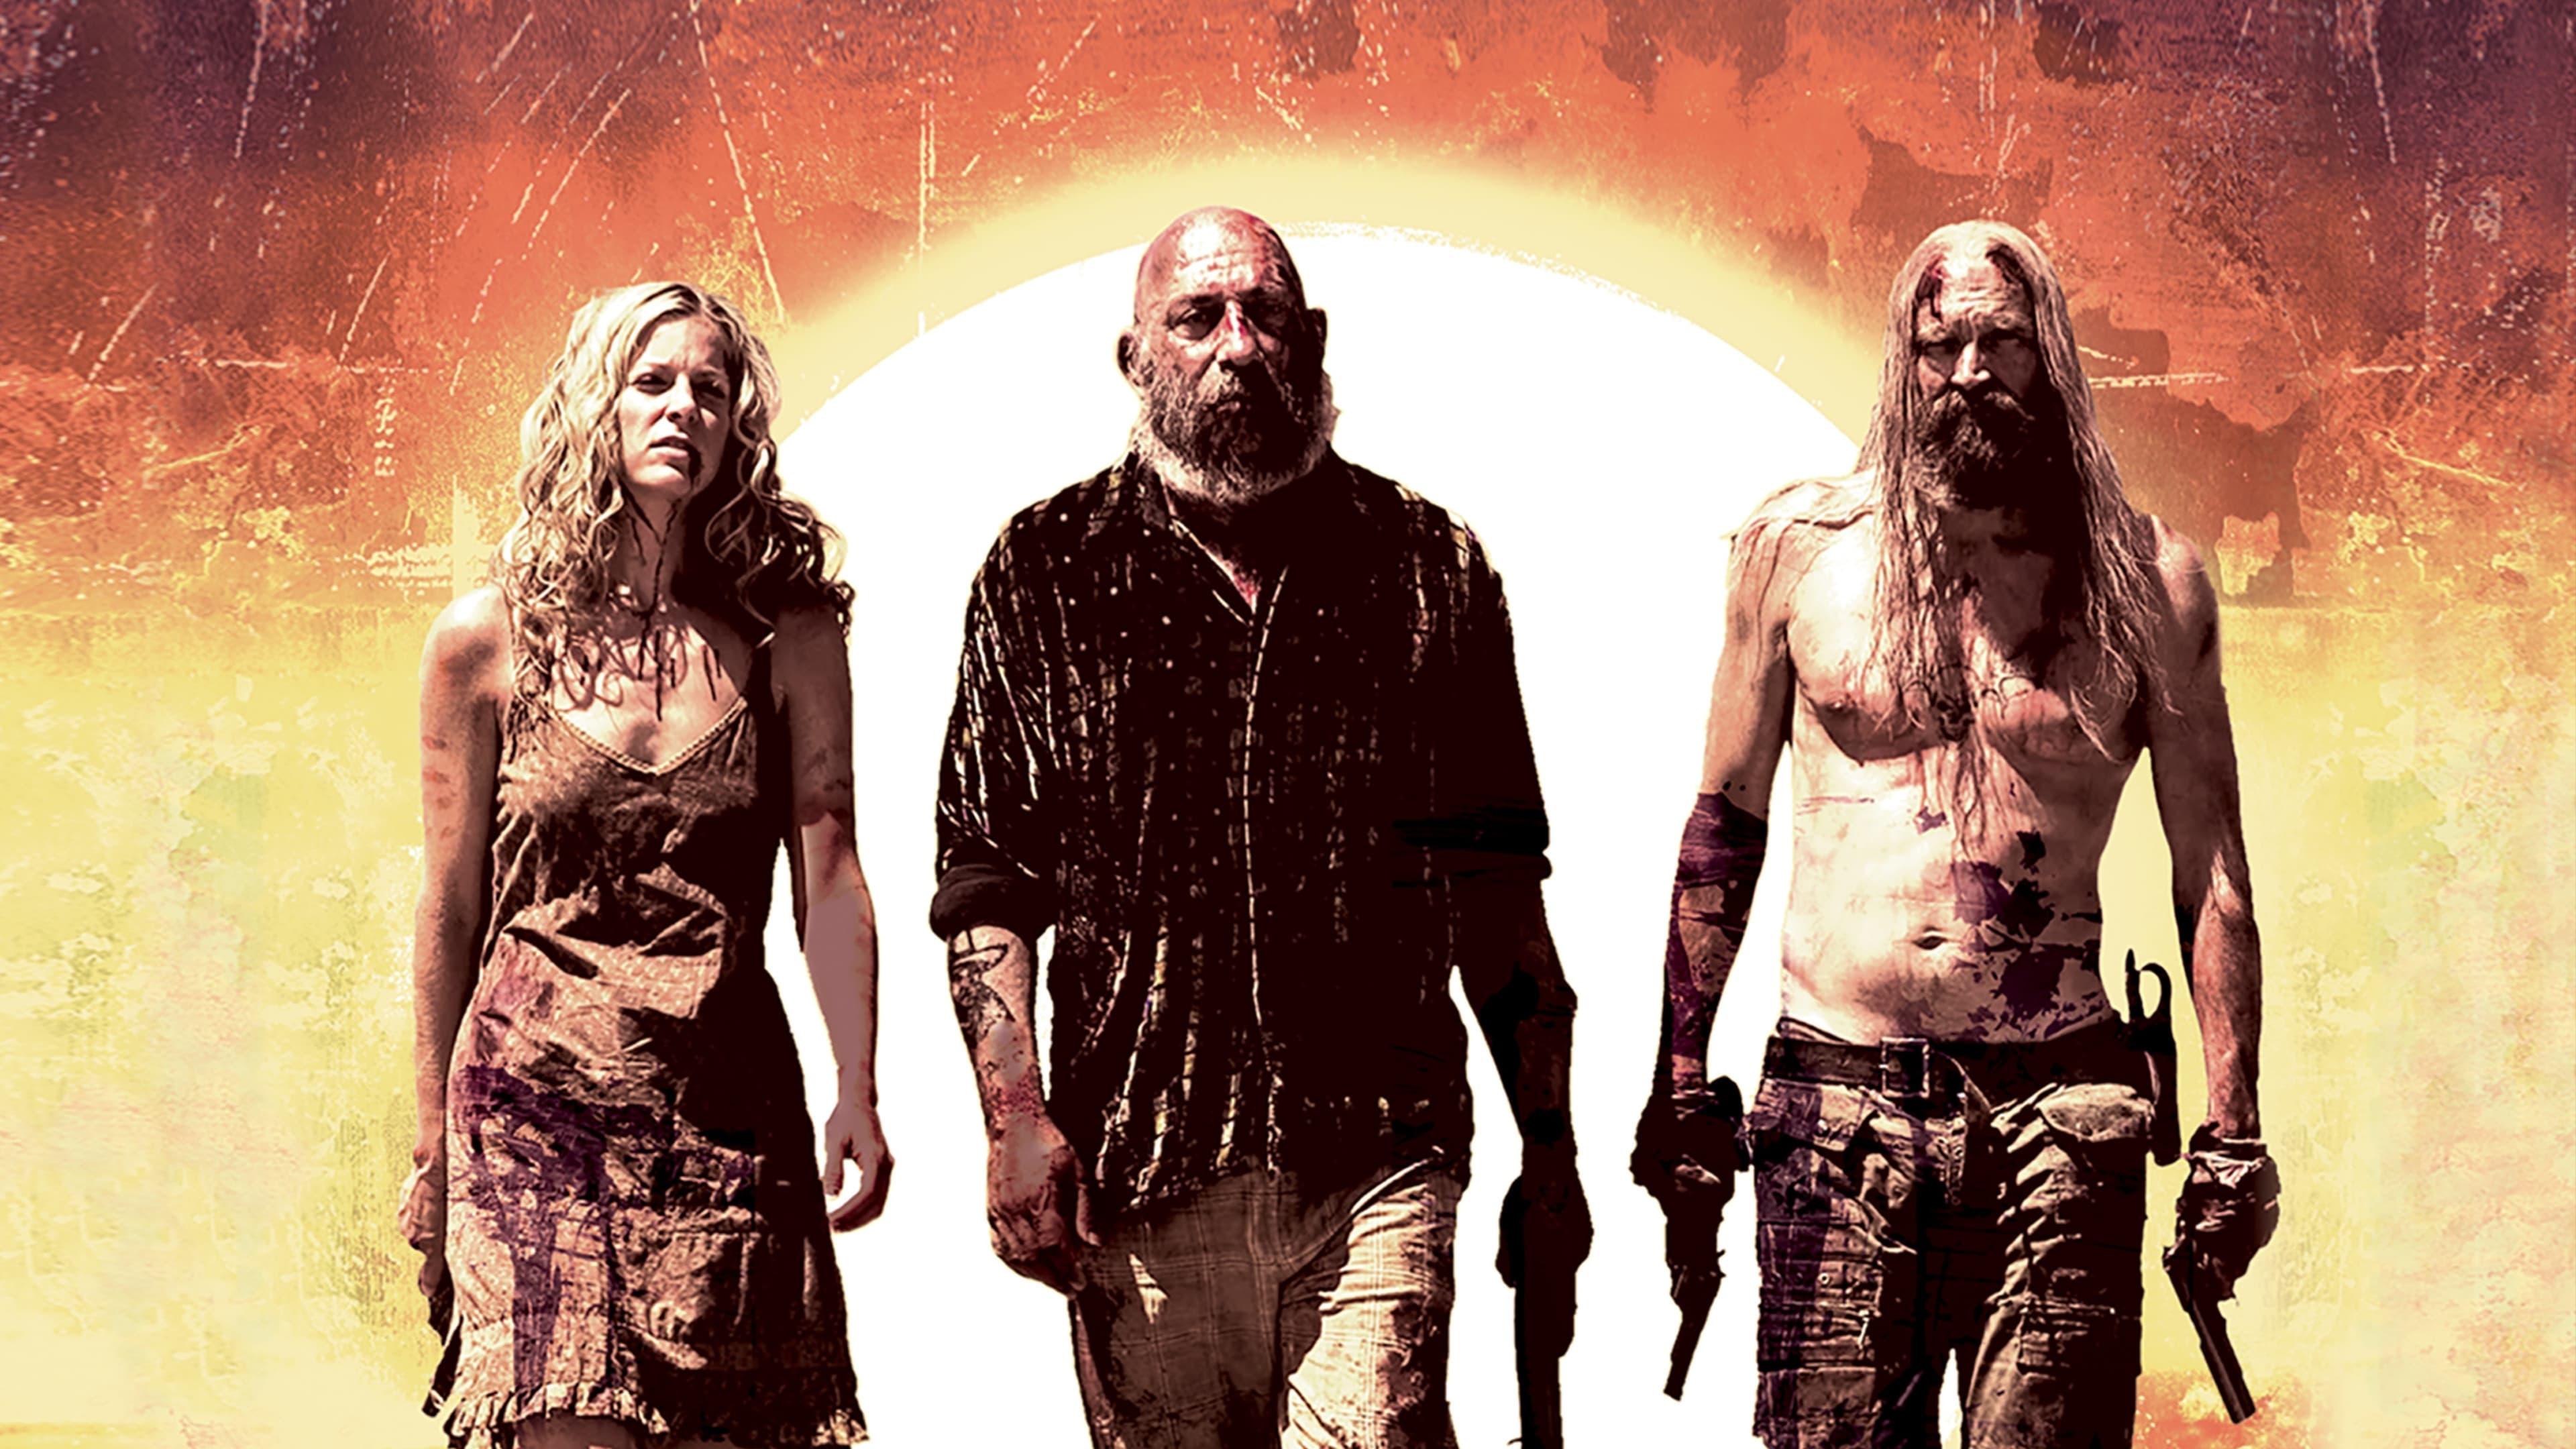 The Devil's Rejects backdrop